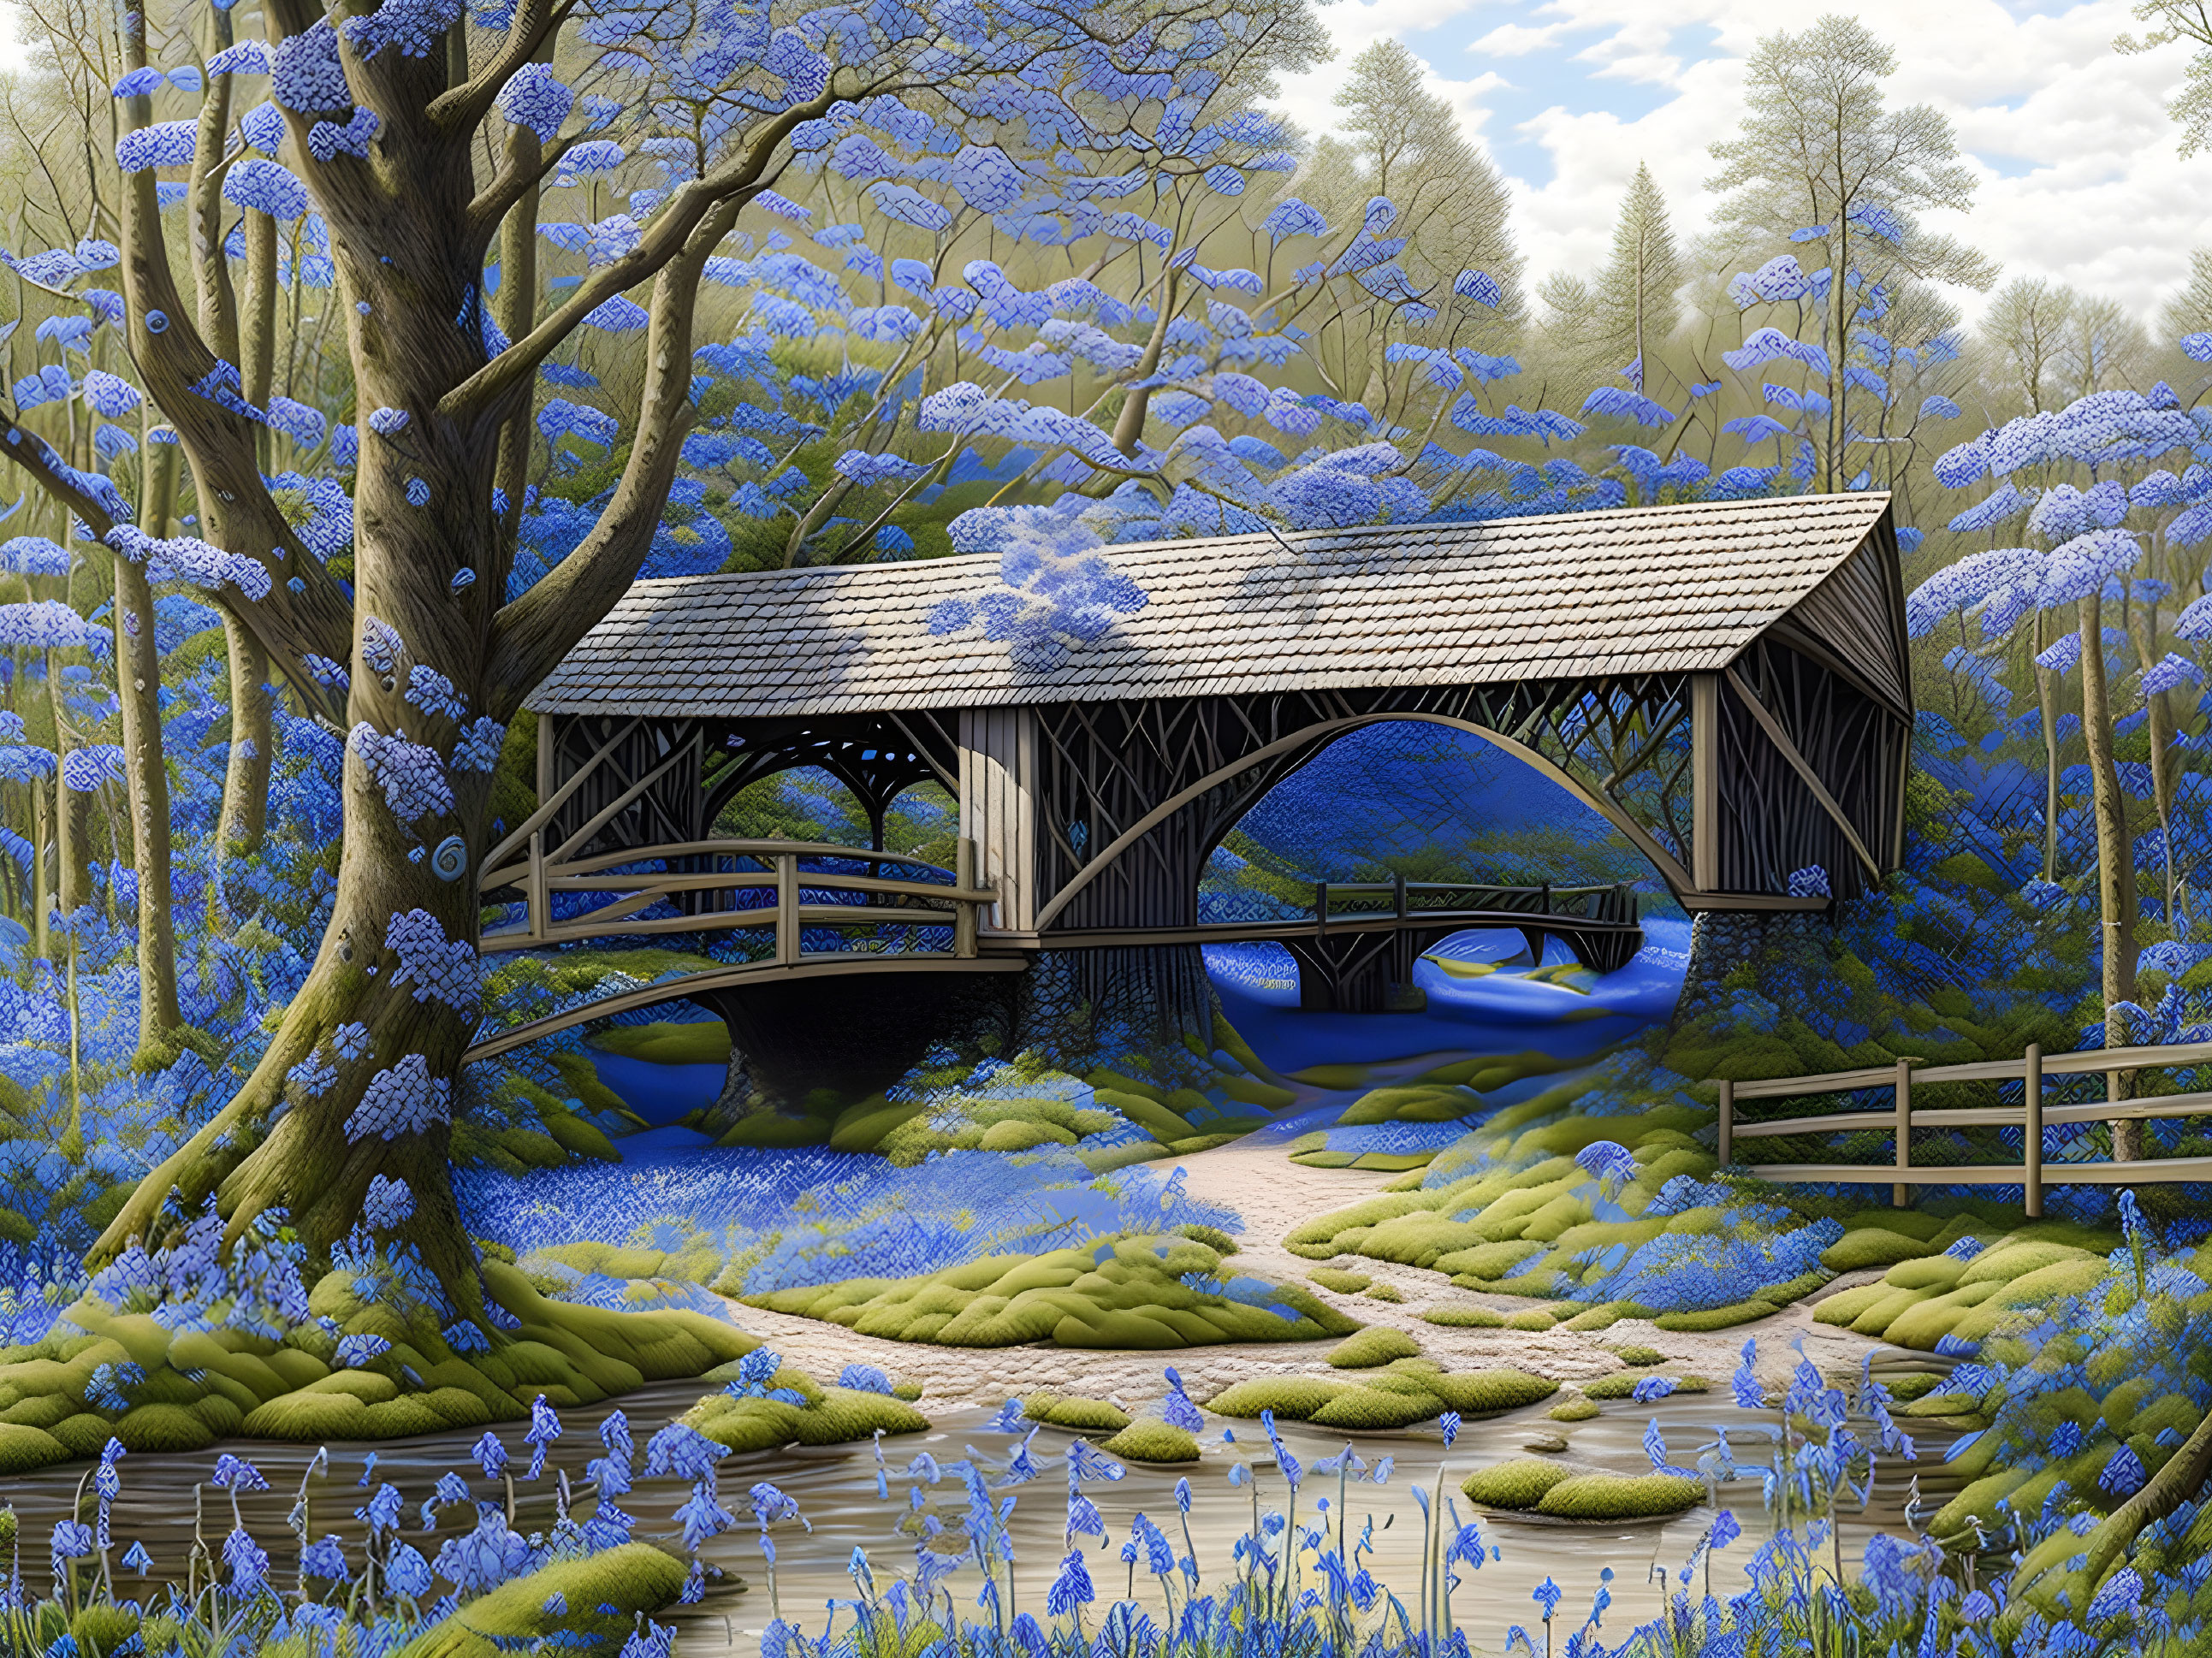 Tranquil landscape with wooden covered bridge and blooming blue flowers